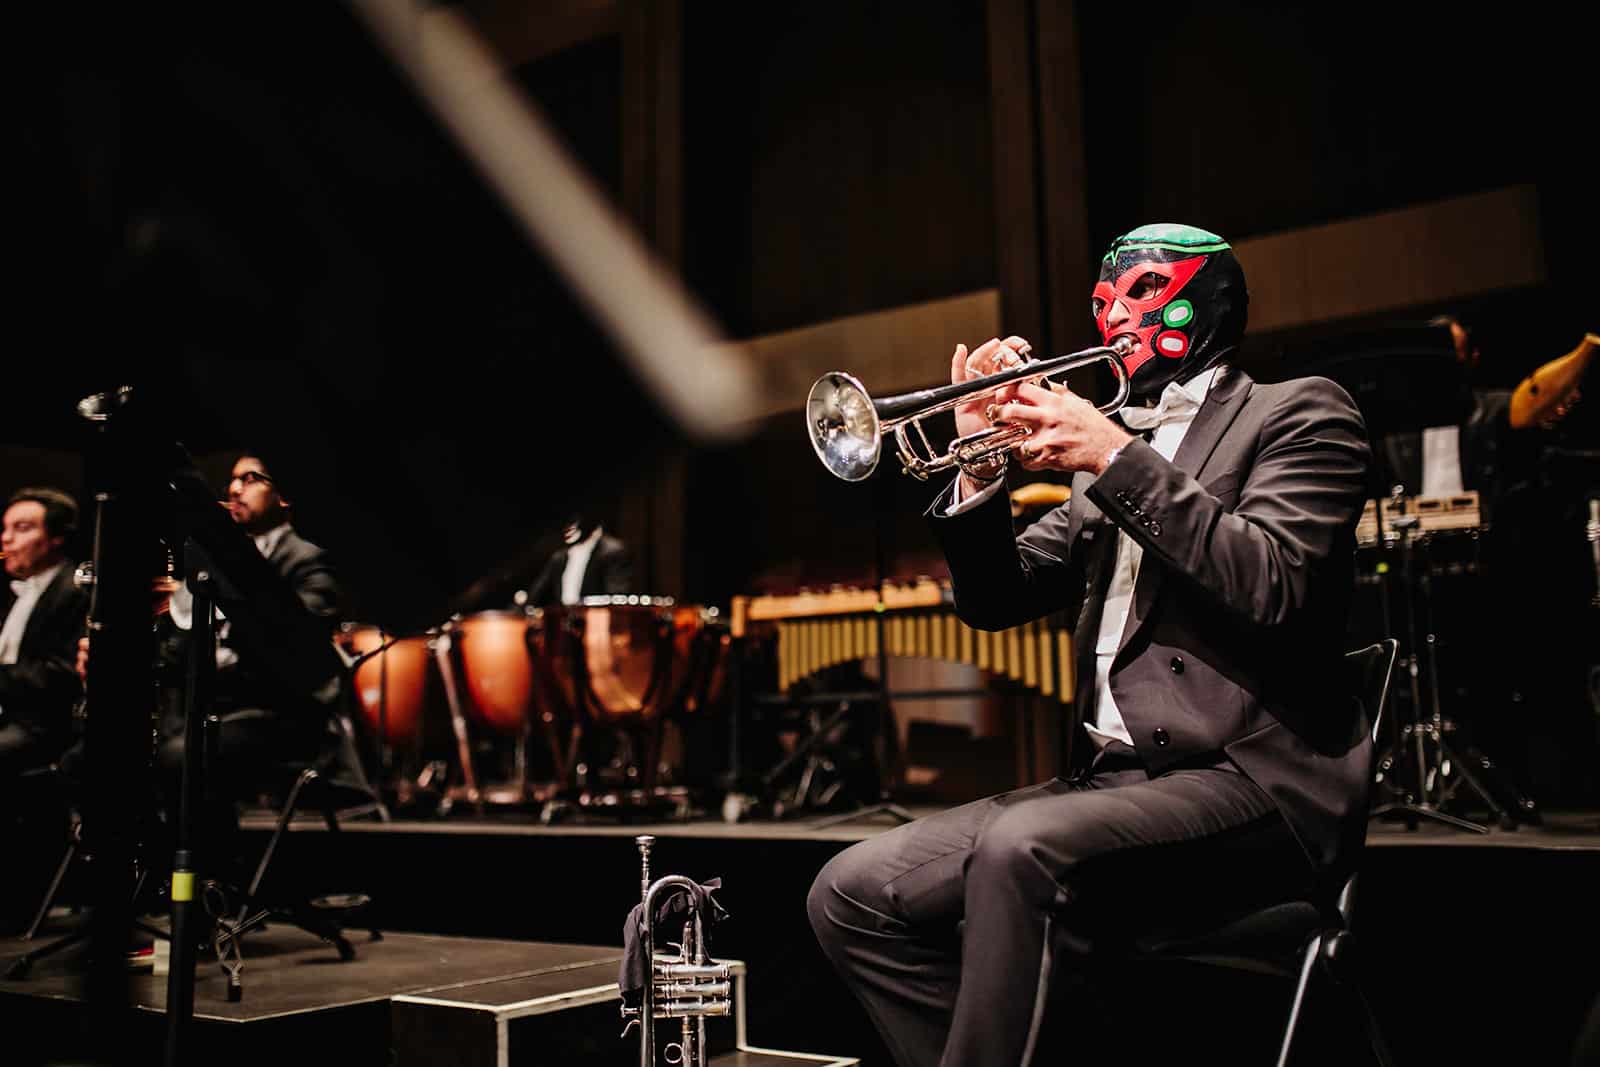 Seated trumpet player wearing black, green, and red luchador mask with orchestra